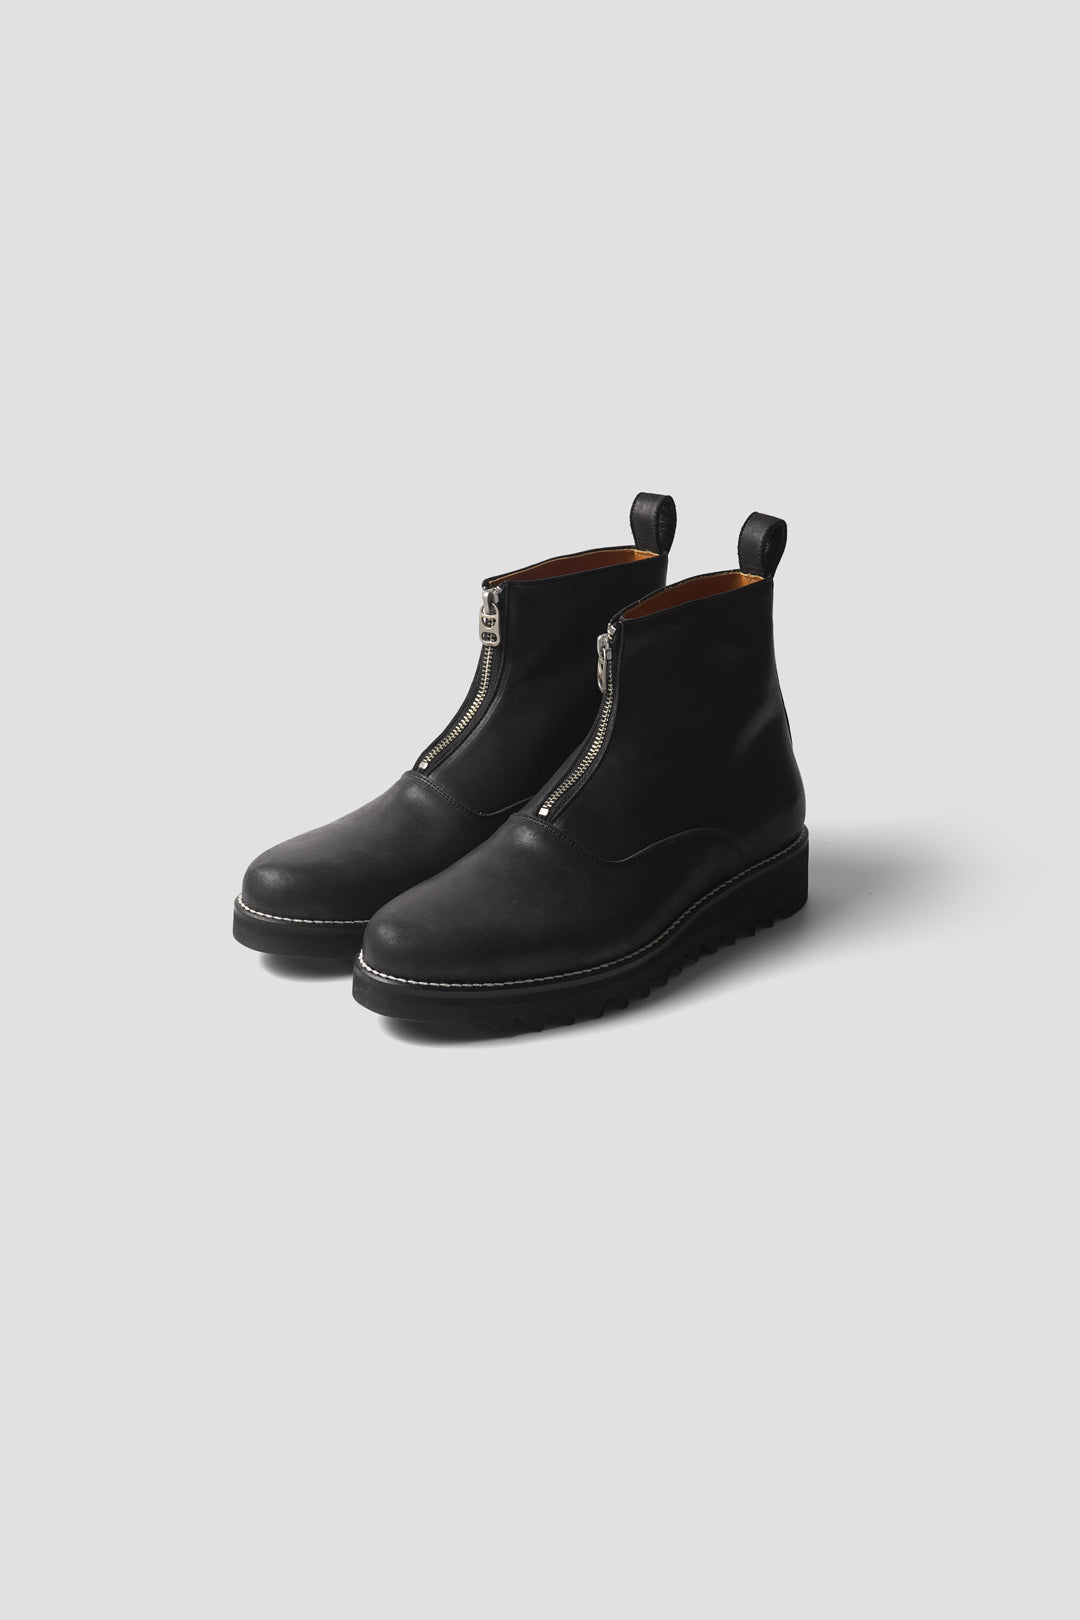 "PULL TAB ZIP BOOTS" TMTK-S-0039 BLACK LEATHER